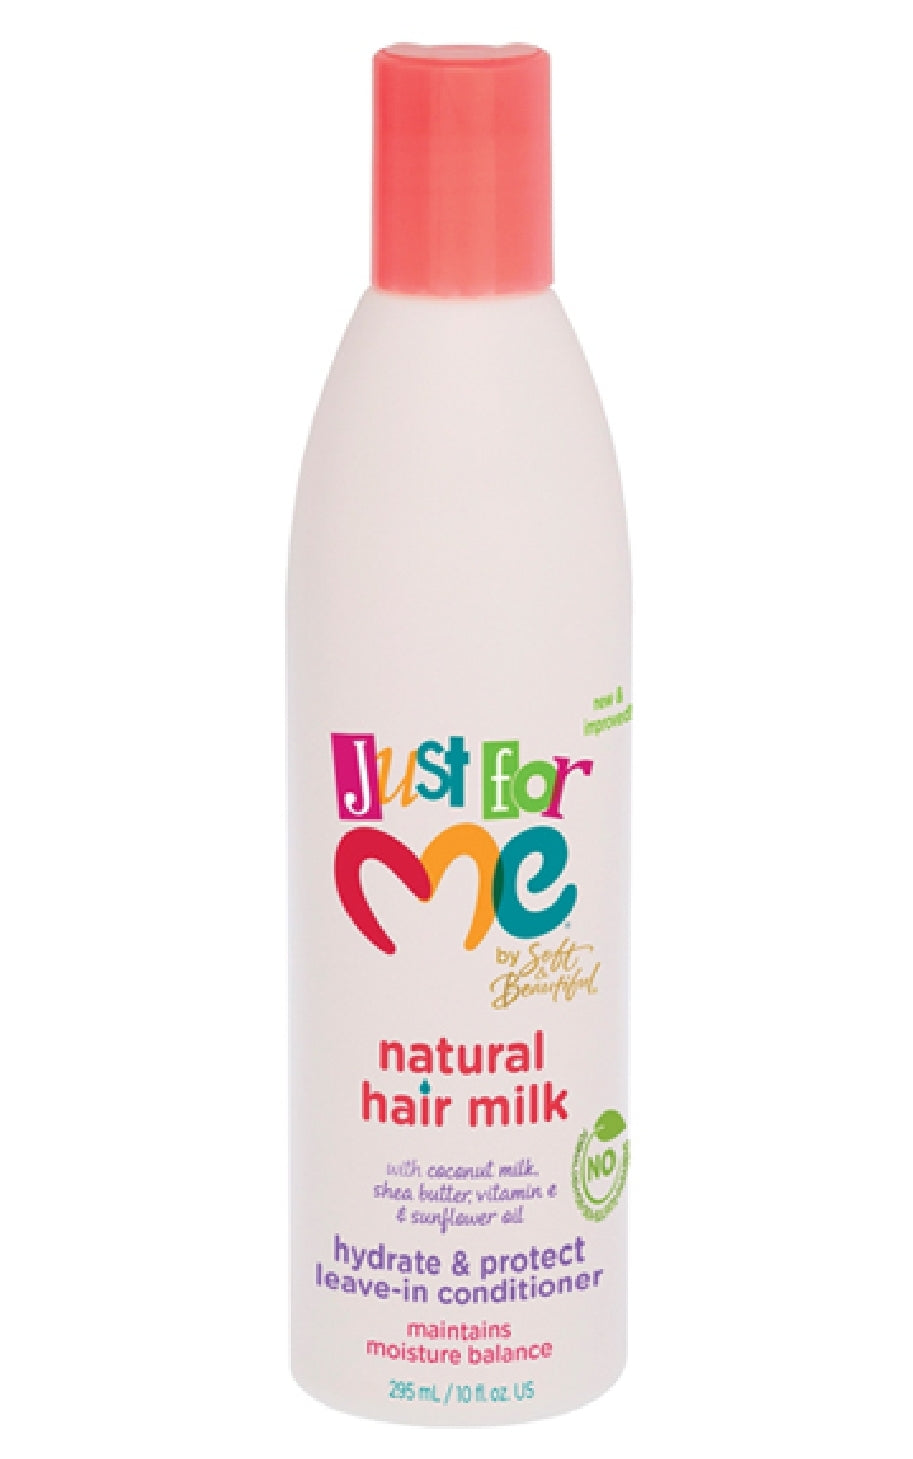 JUST FOR ME- NATURAL HAIR MILK HYDRATE & PROTECT LEAVE IN CONDITIONER